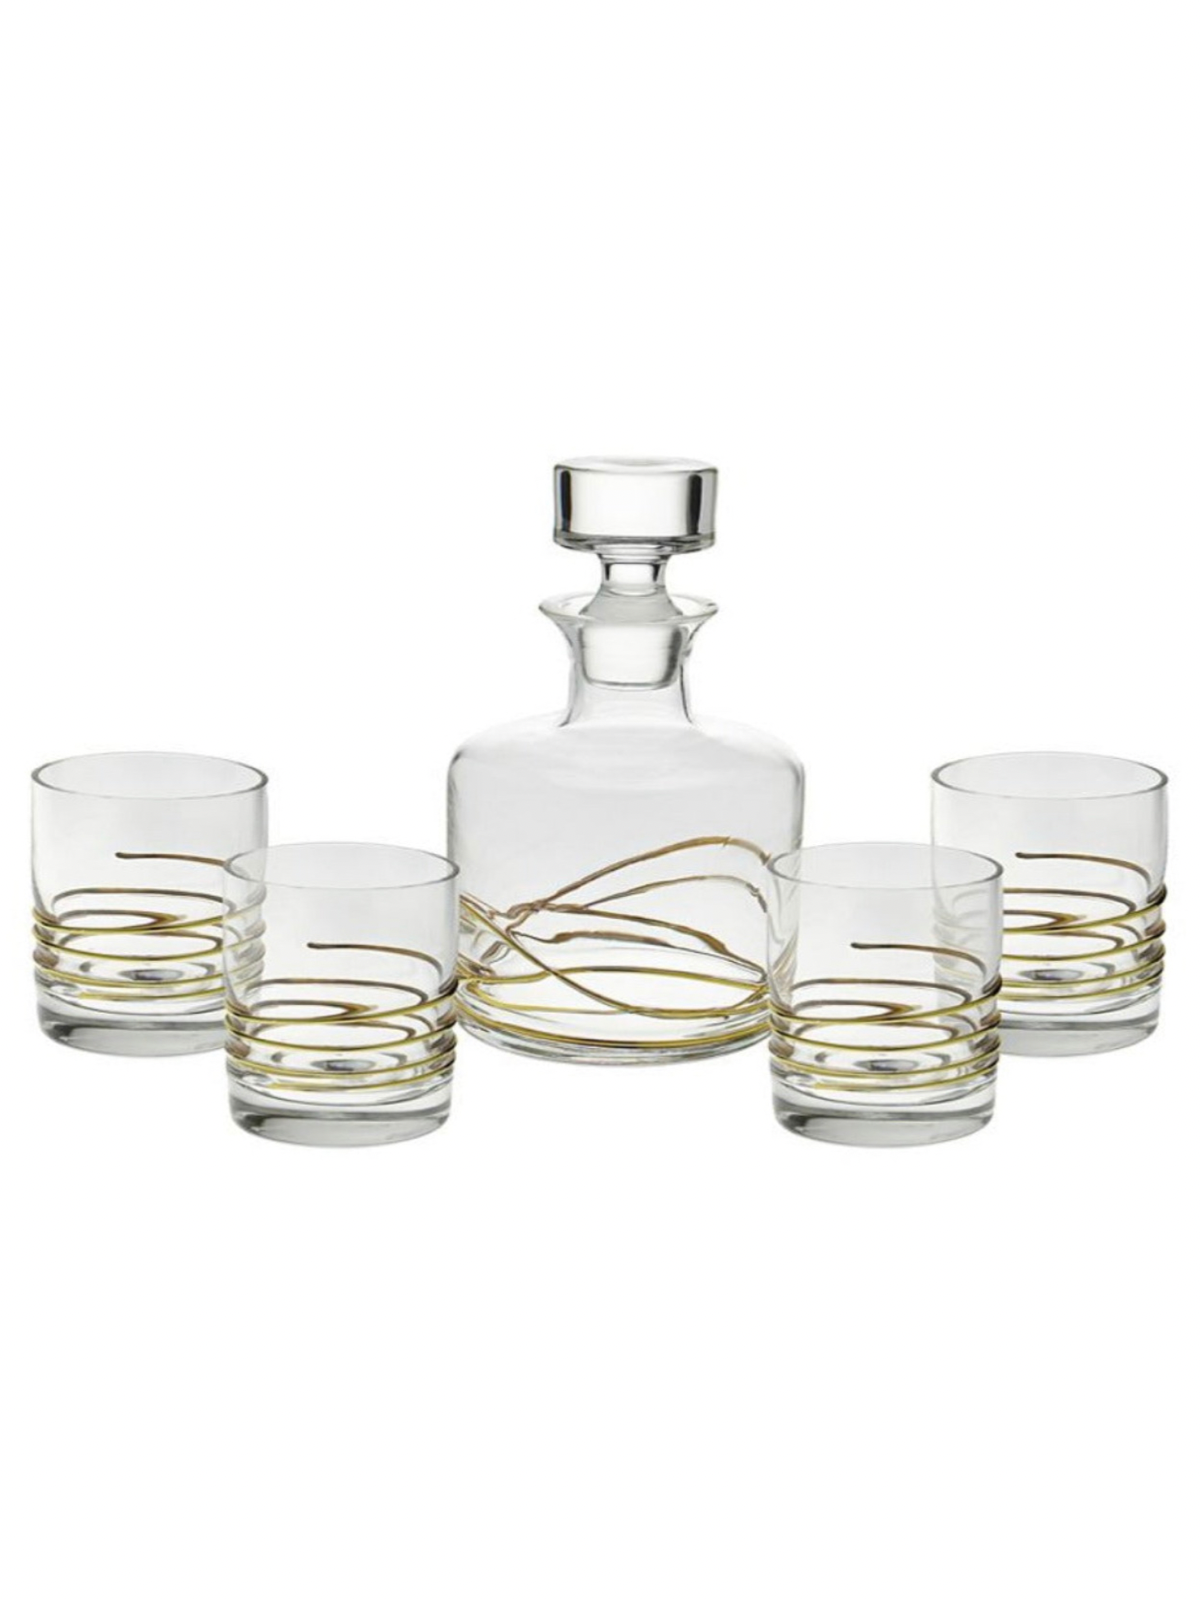 The Dolce Liquor 5-piece Set is decorated with an alluring gold design. Makes a great gift for weddings, holidays, and other occasions. 